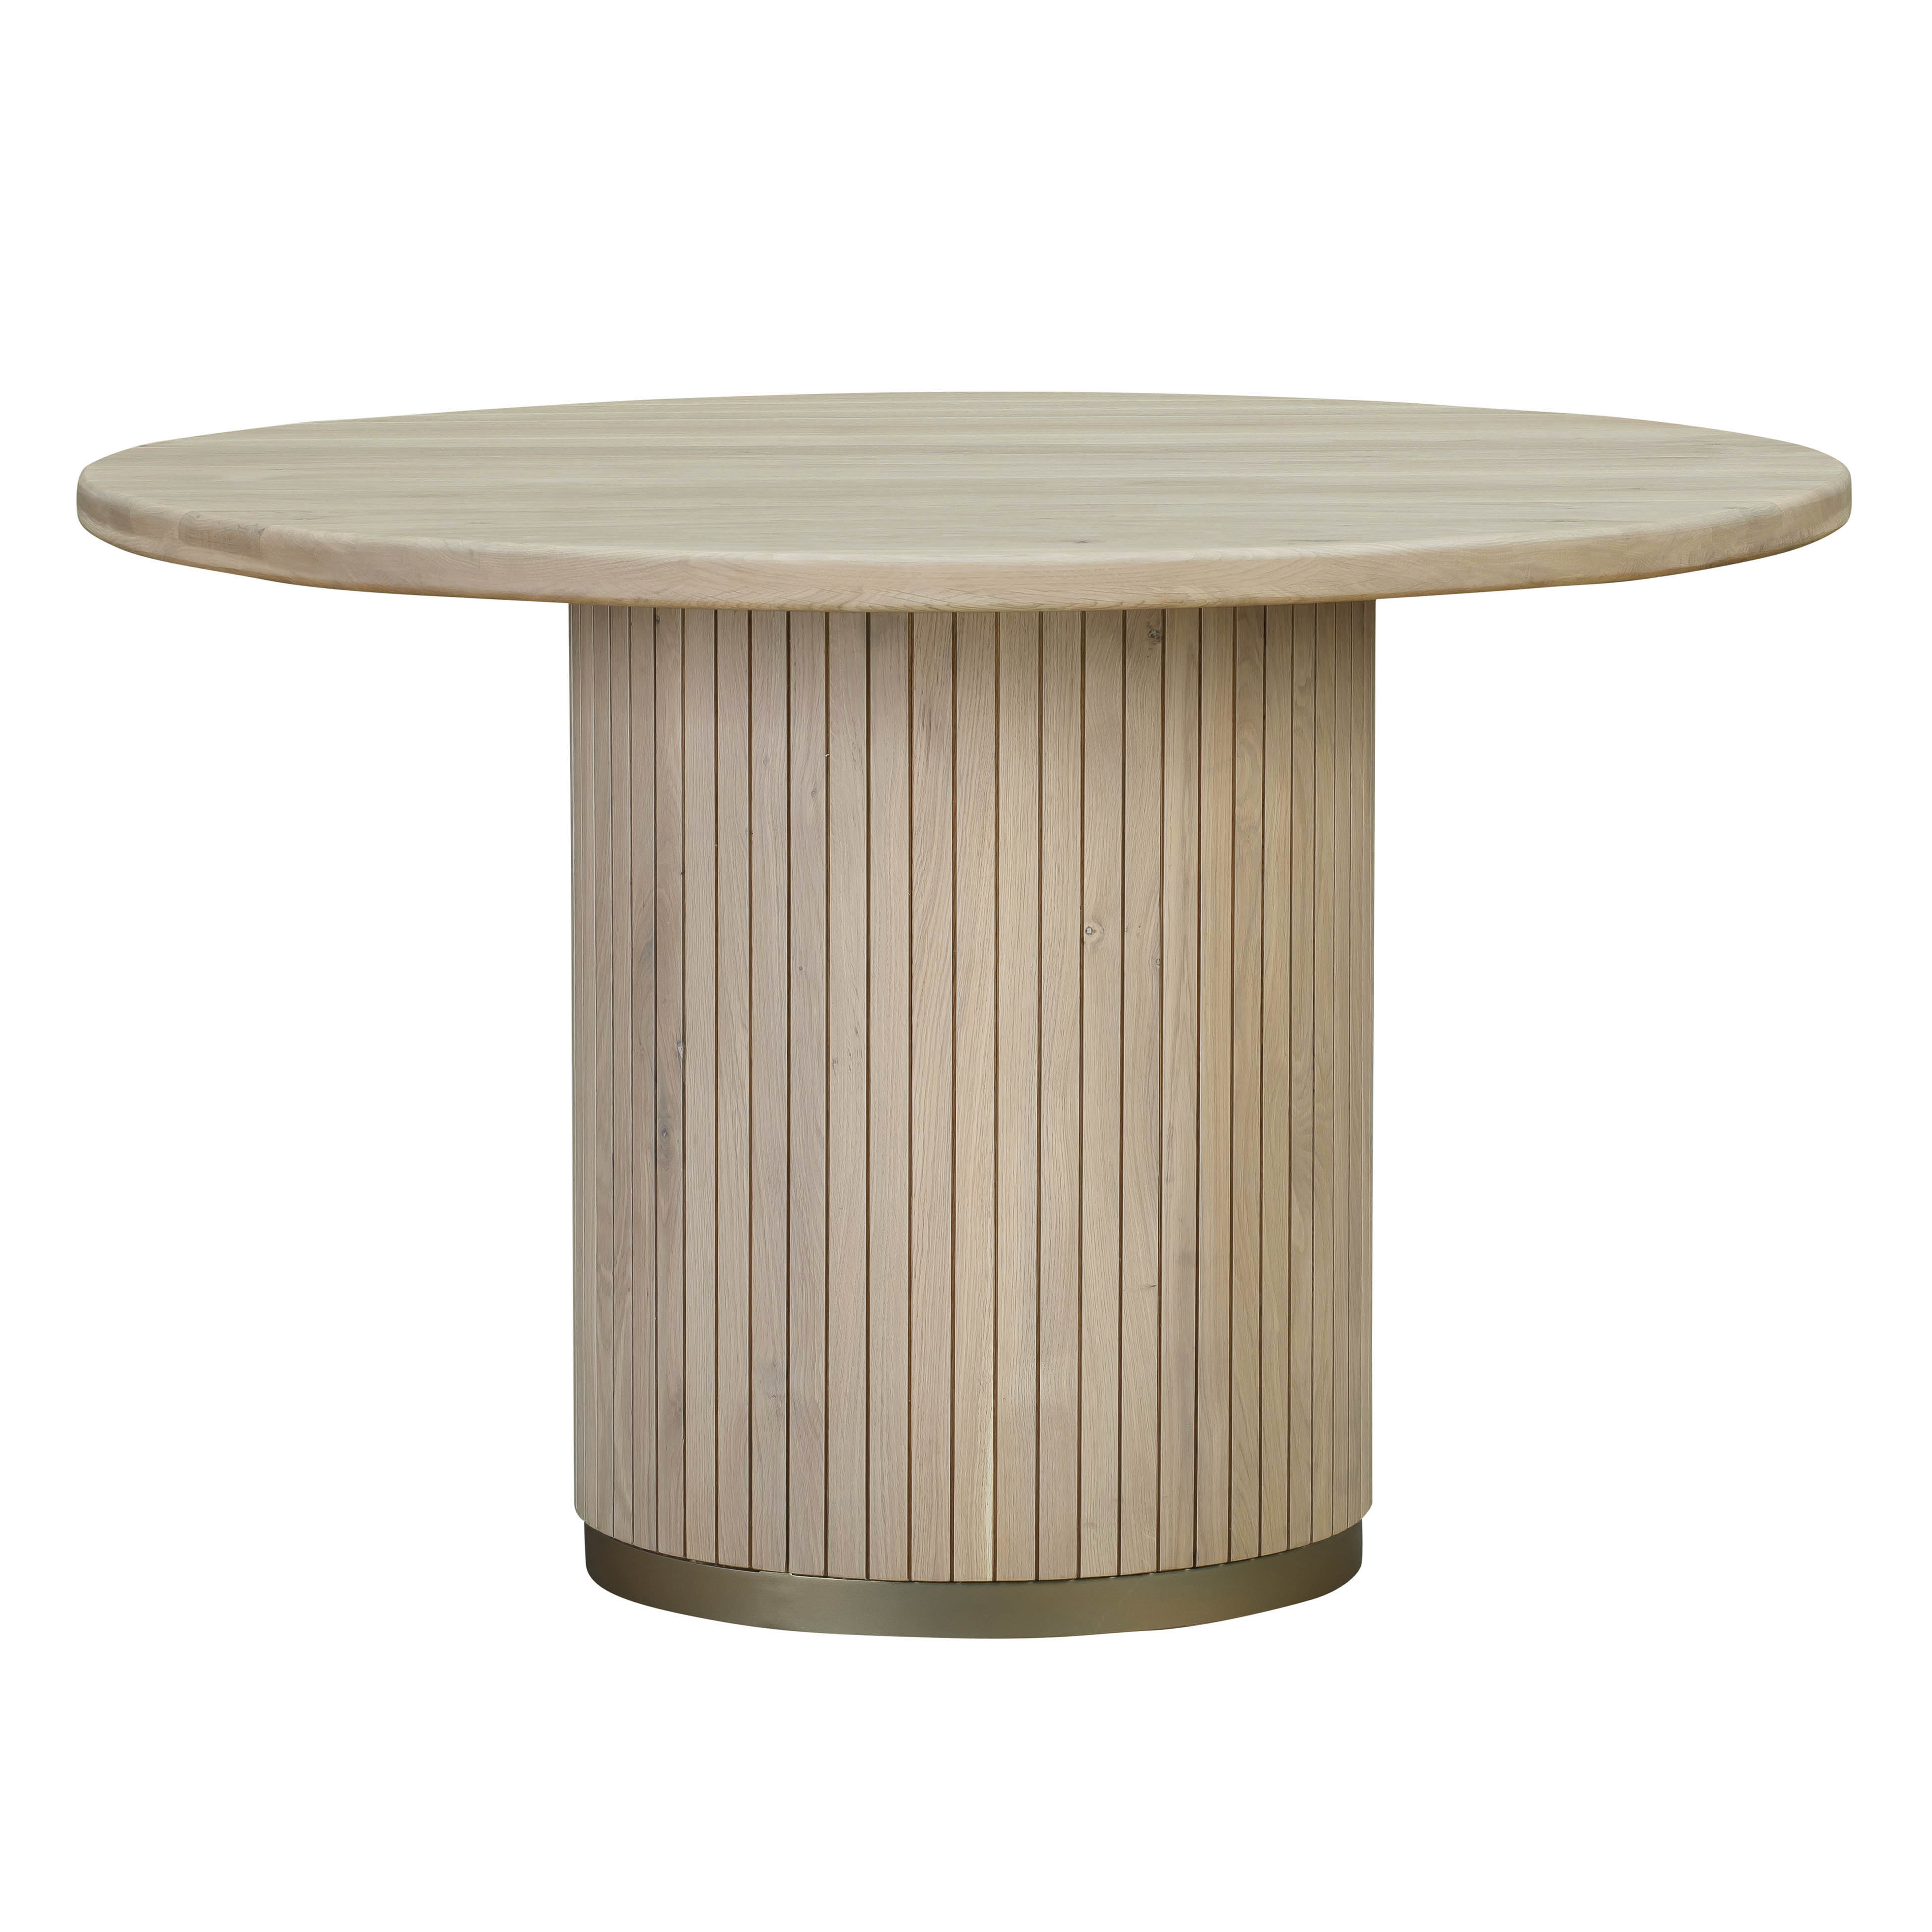 Ayla Round Dining Table - Maren Home